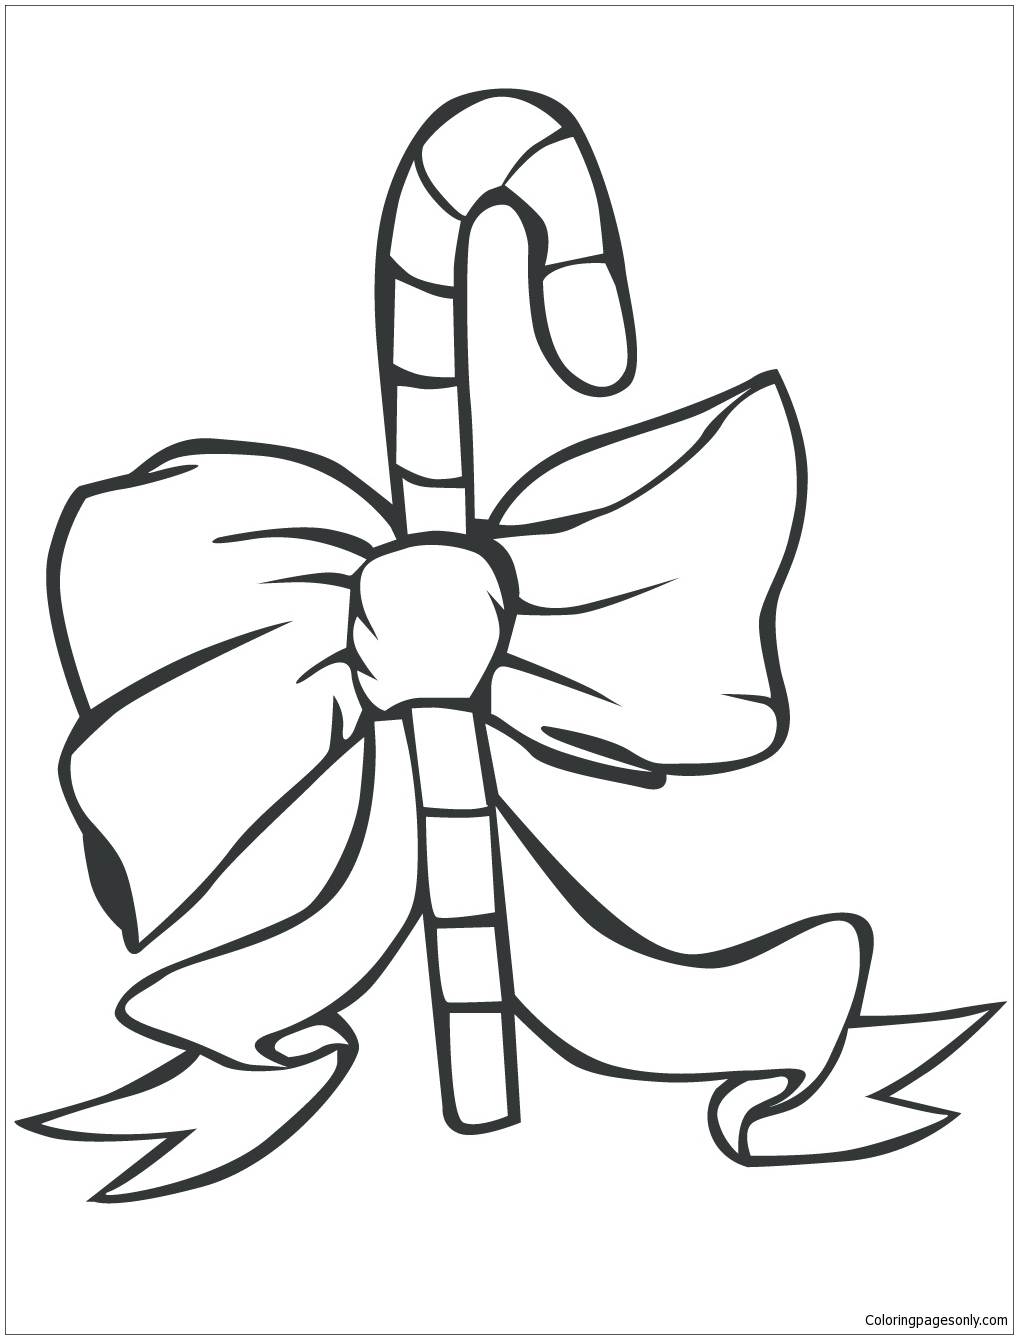 Candy Cane with Bow Coloring Page